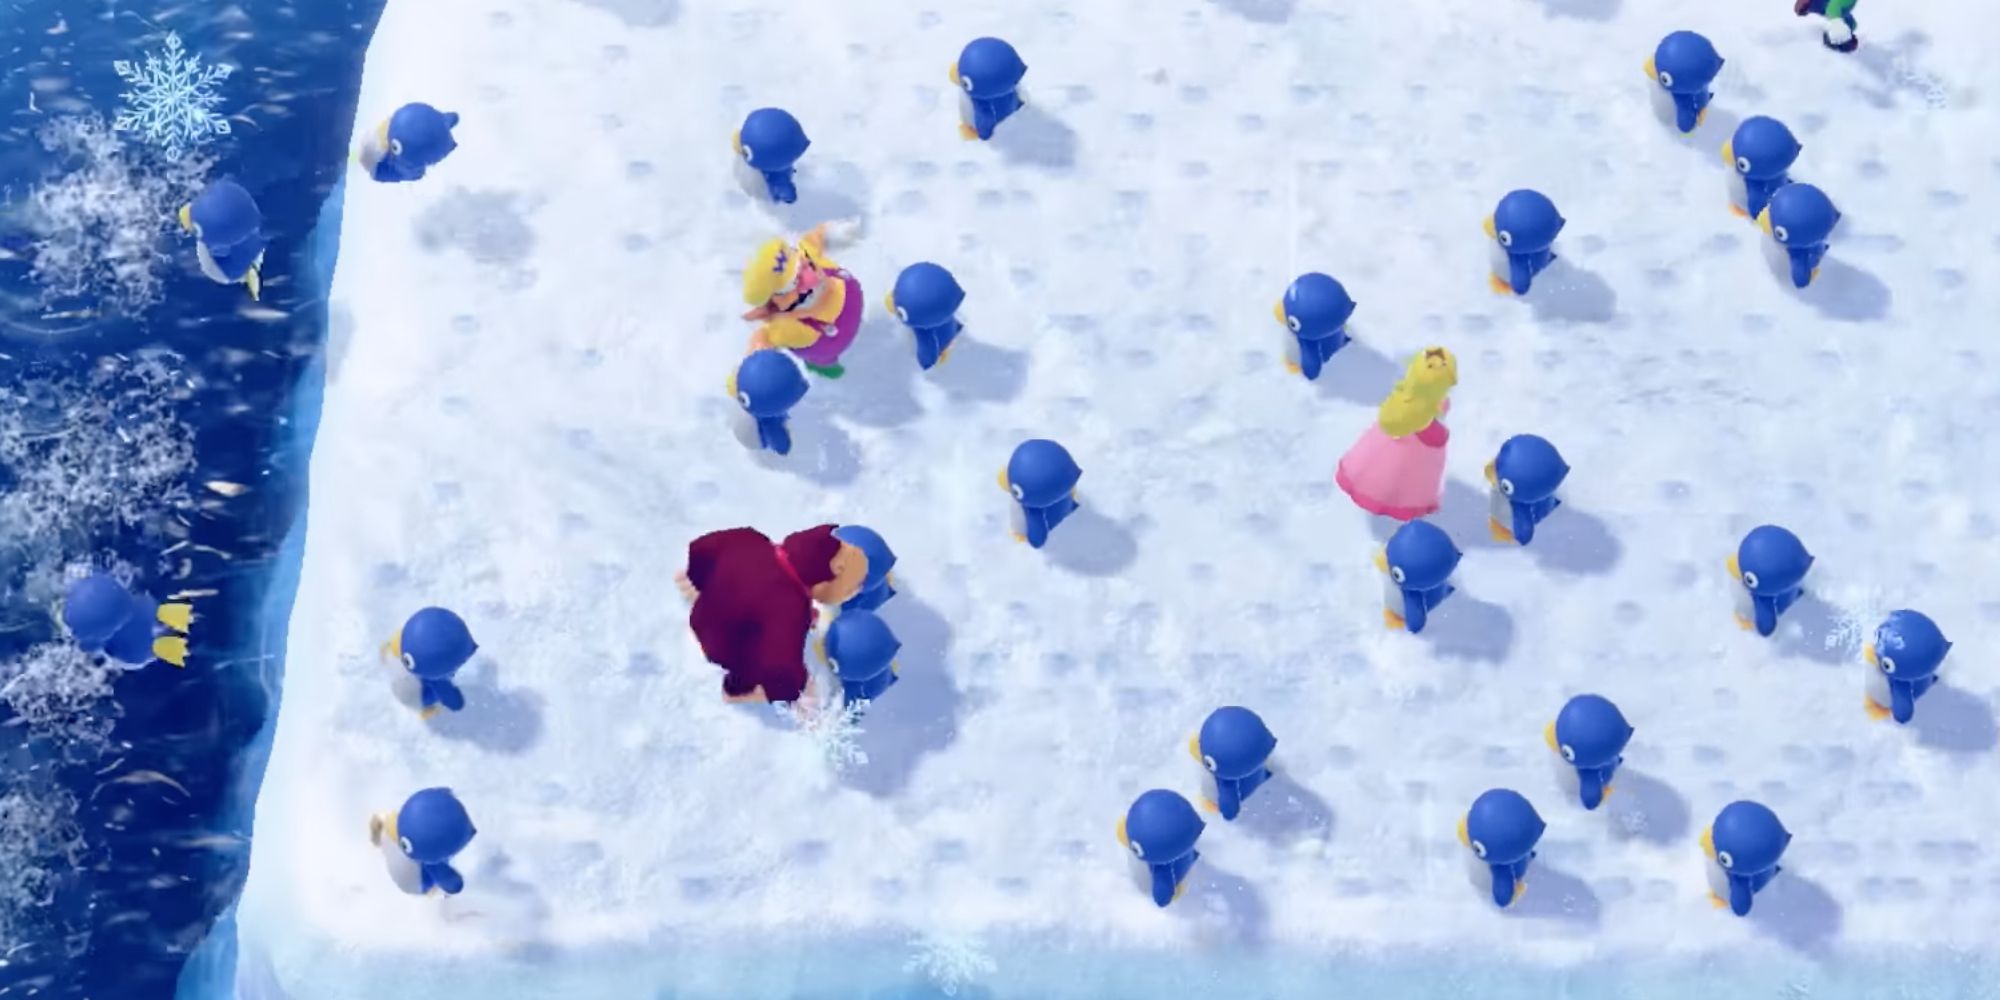 Pushy Penguins from Mario Party Featuring Wario, DK, and Princess Peach